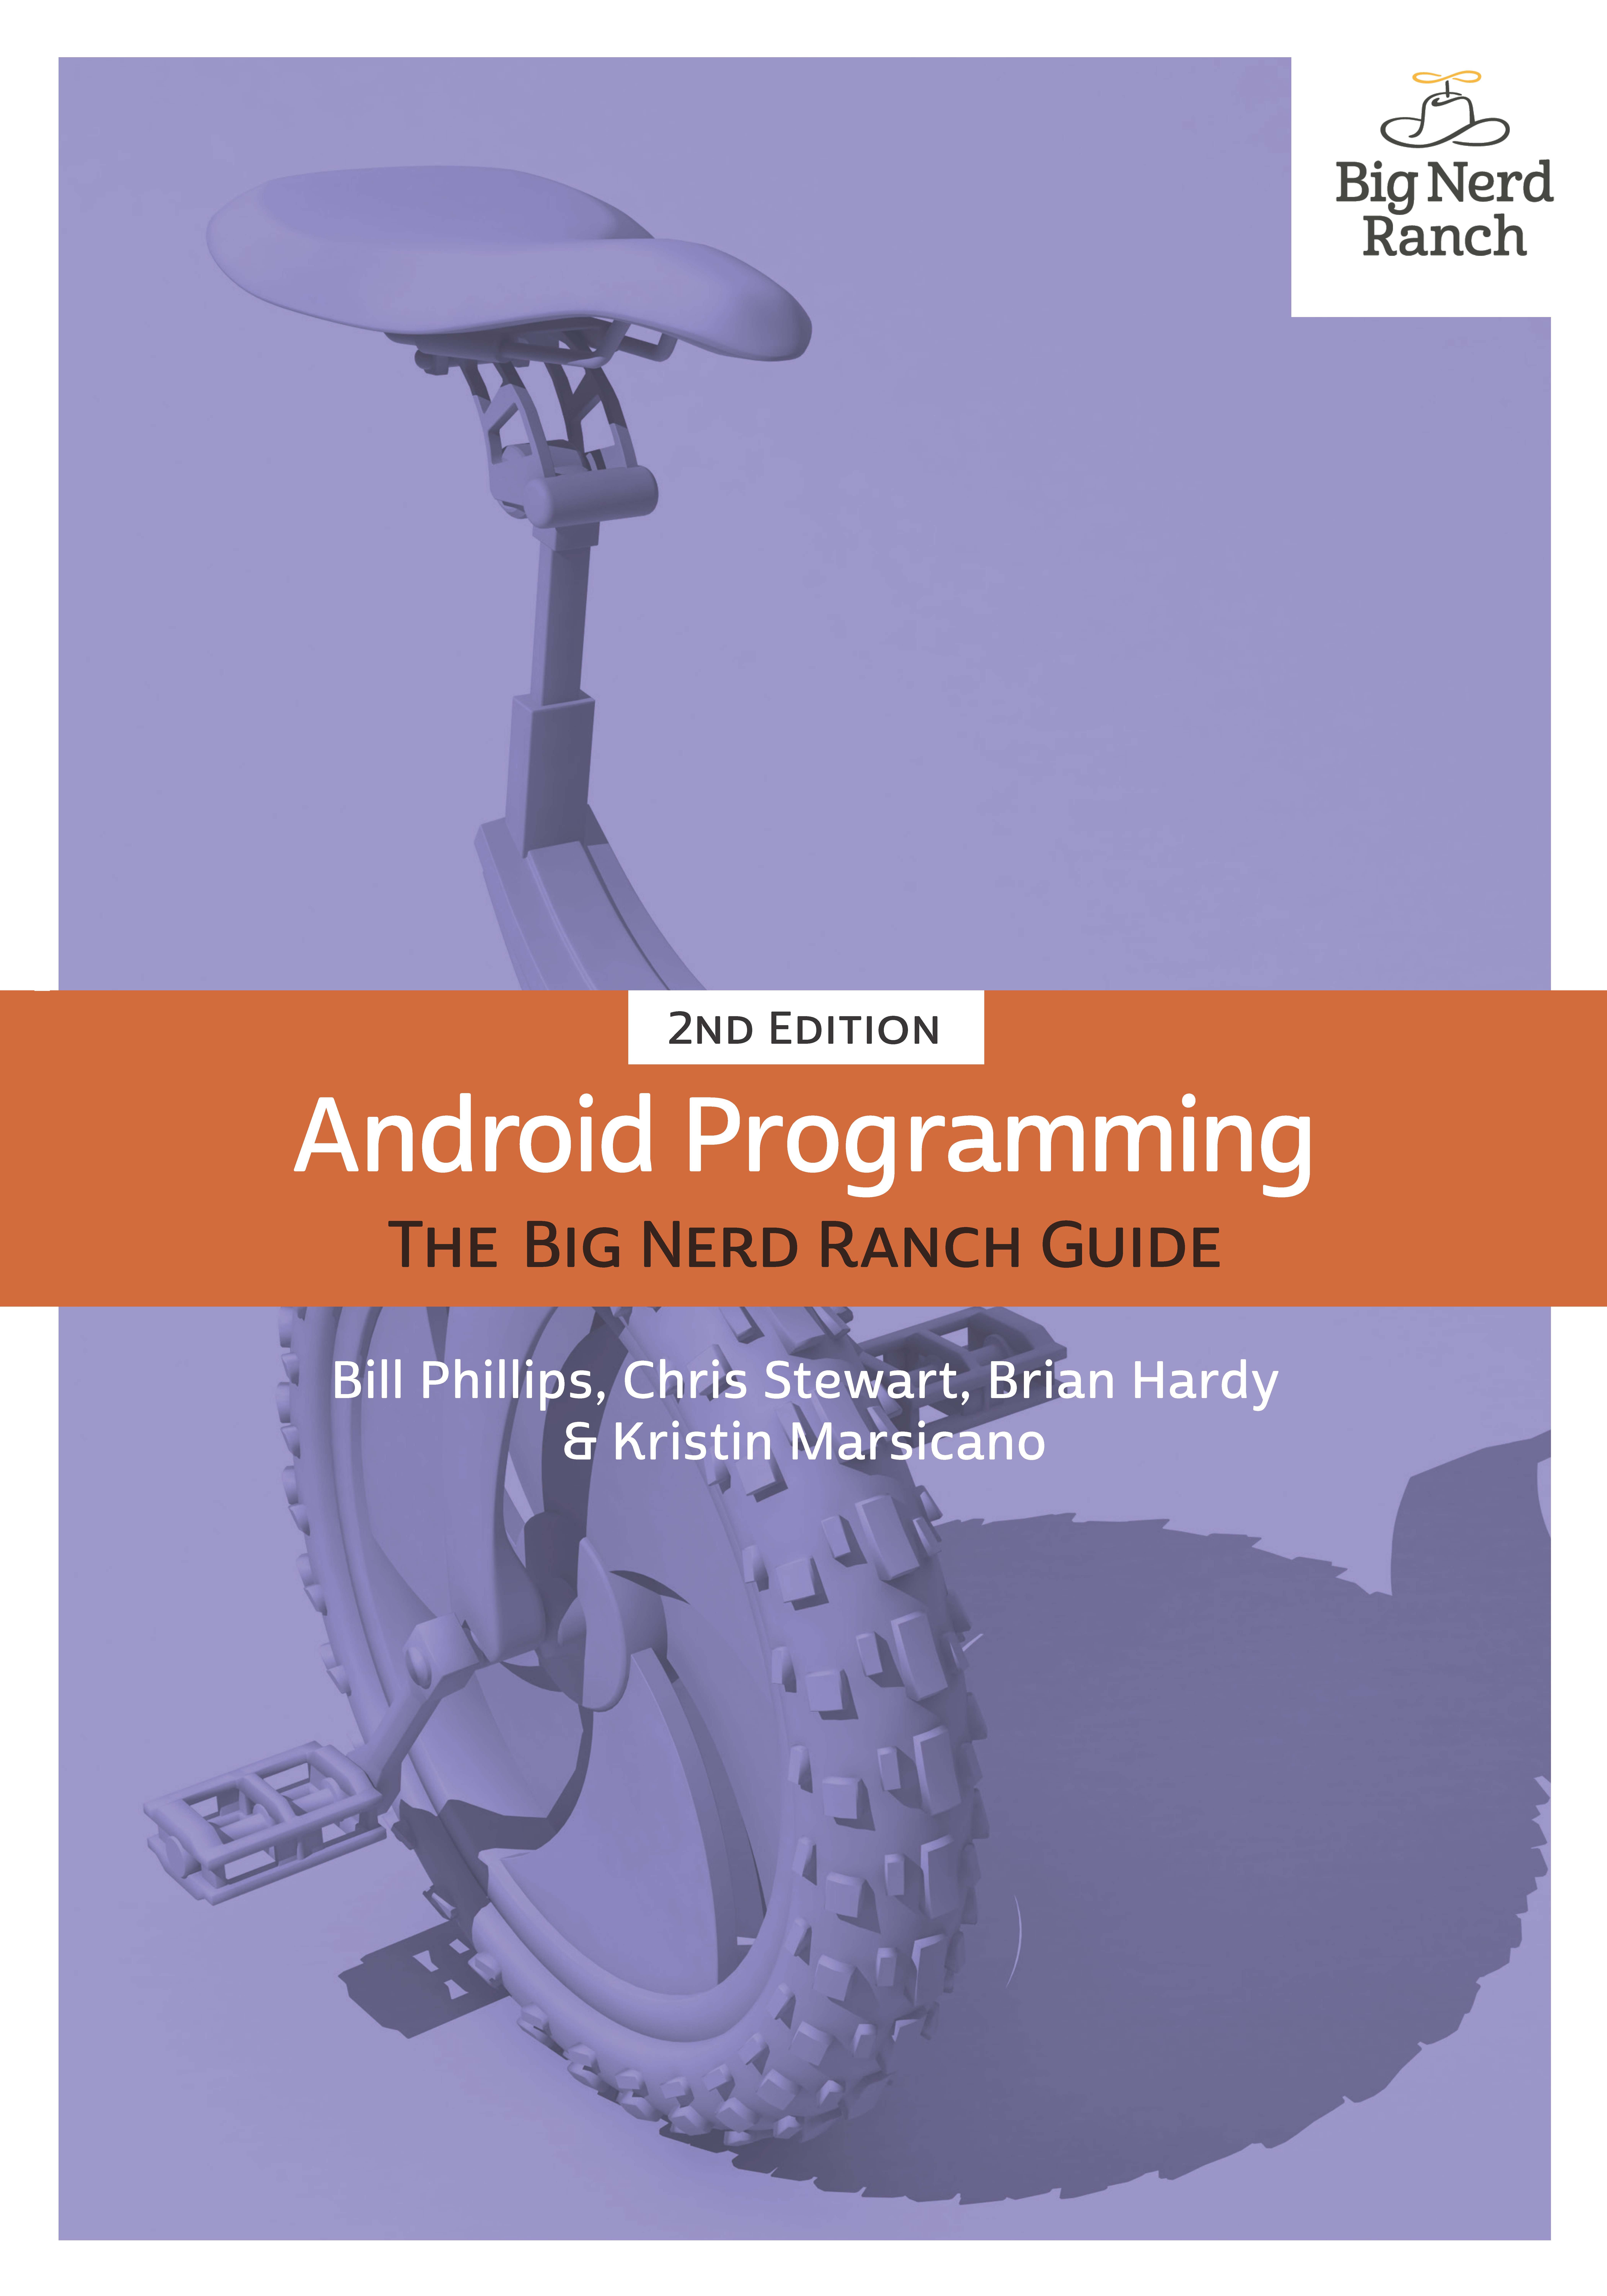 Android Programming: The Big Nerd Ranch Guide, 2nd Edition